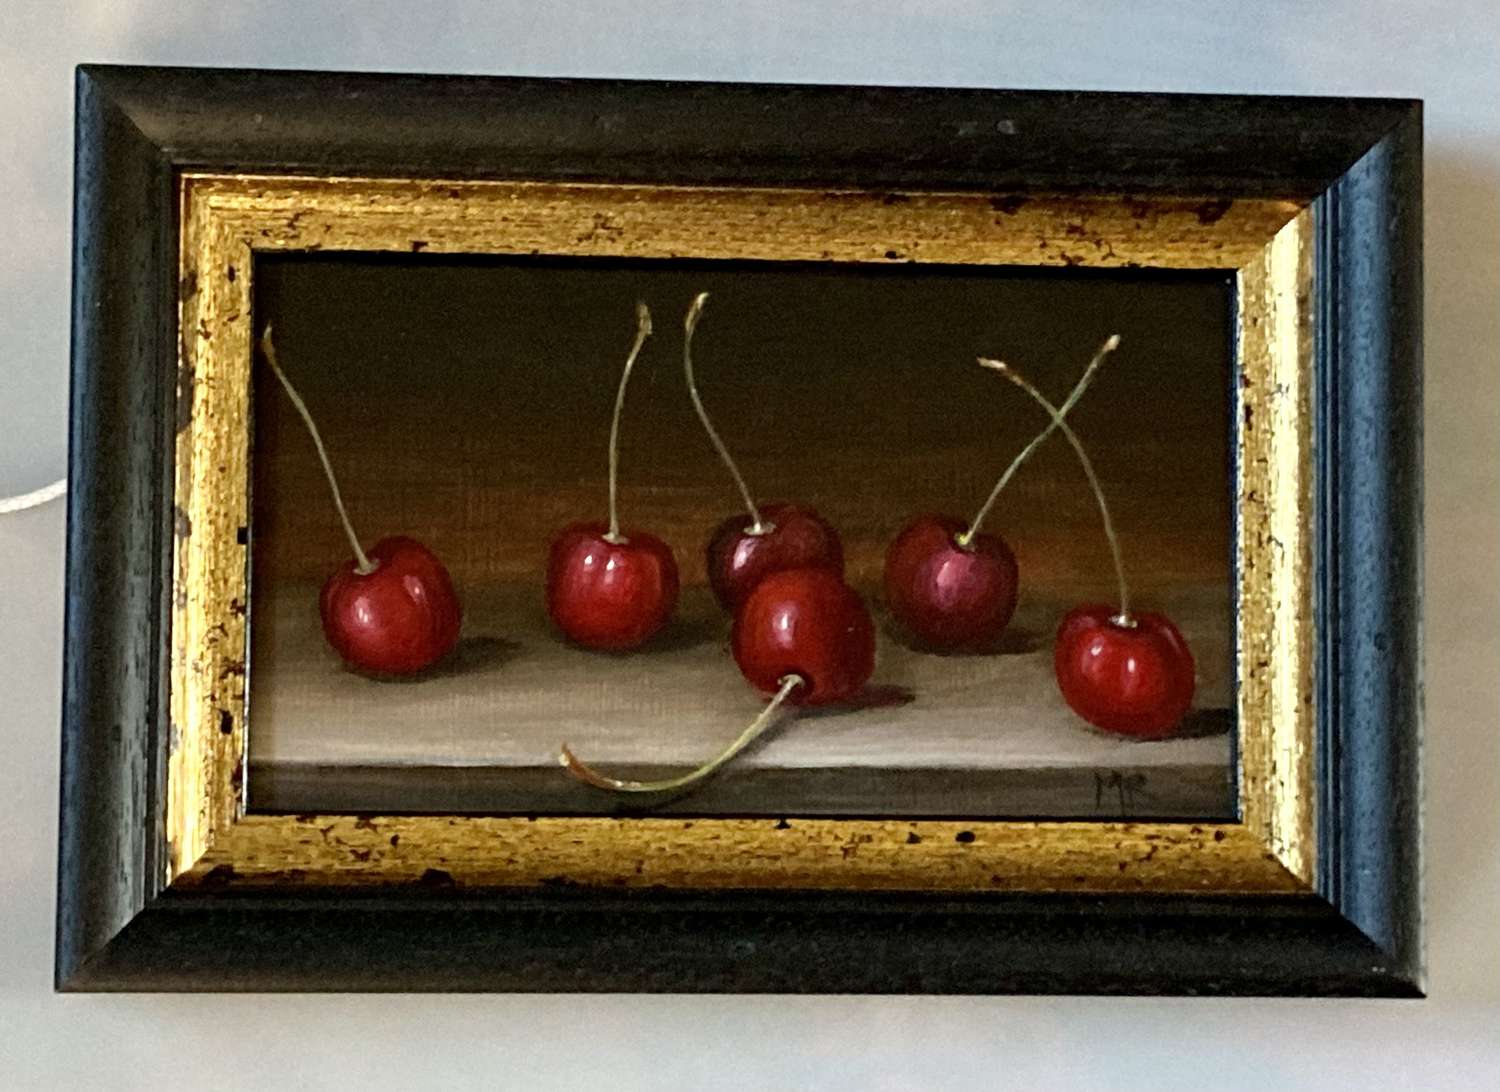 Cherries on a table.